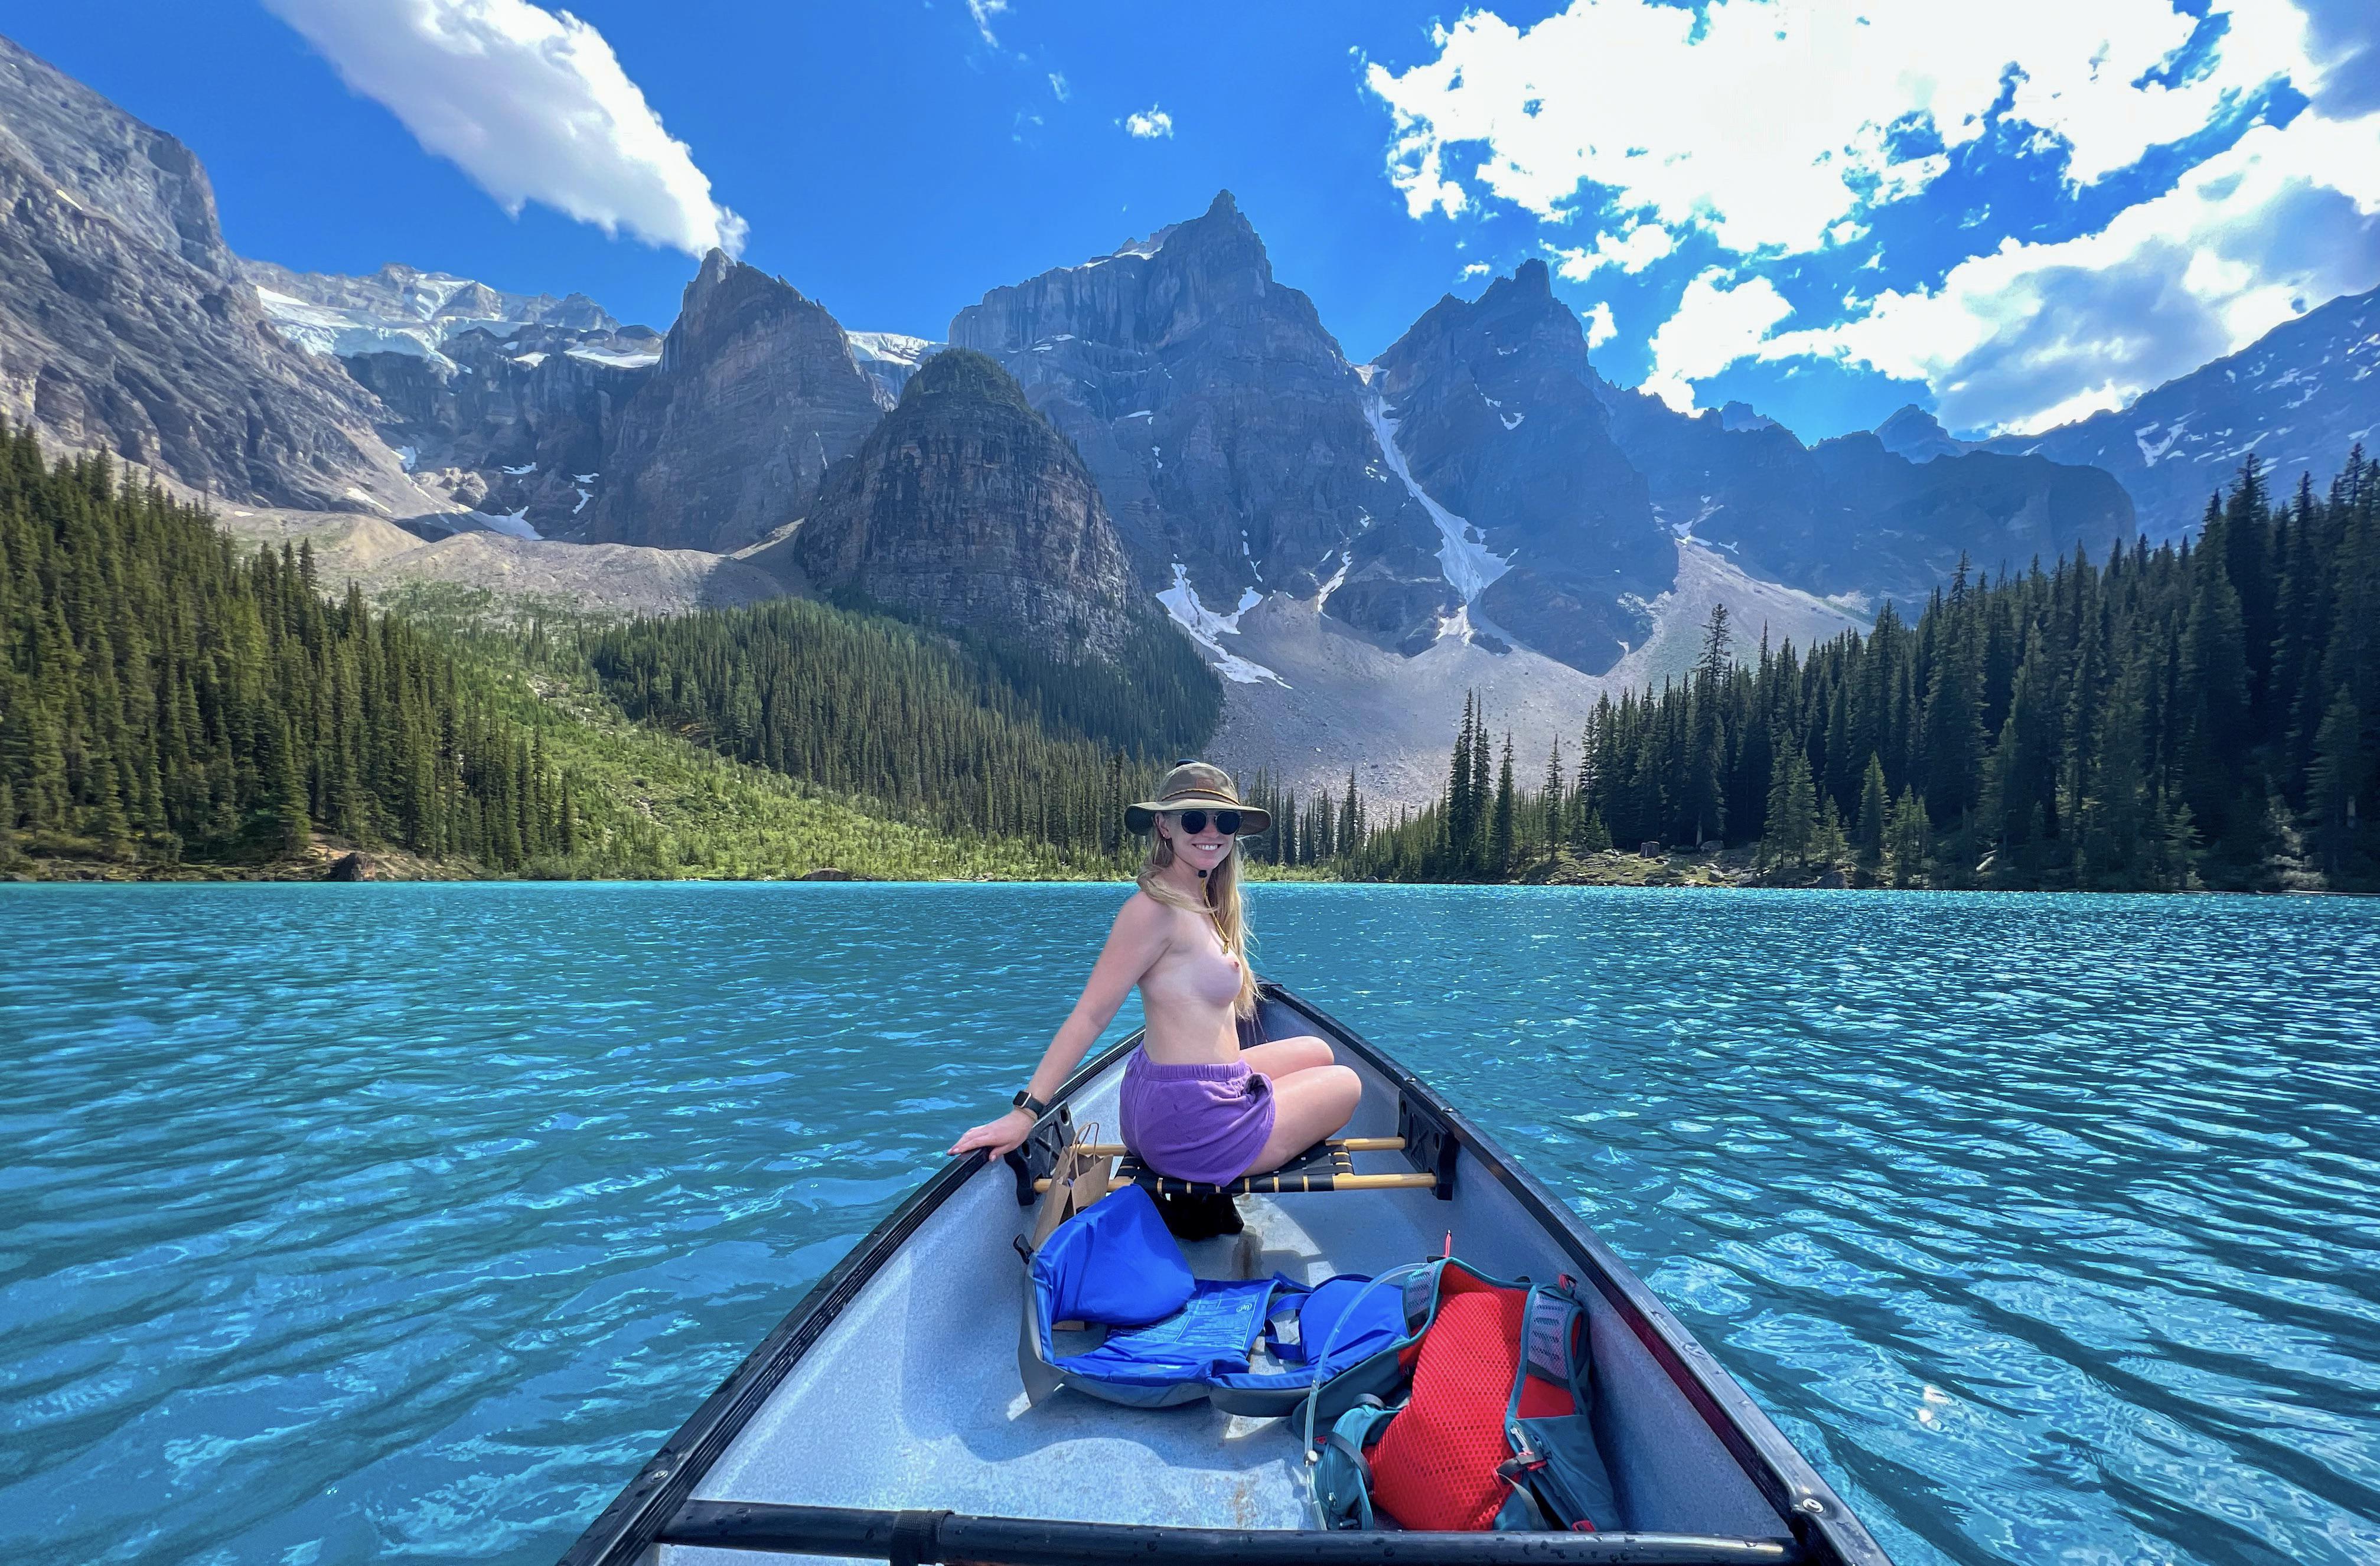 Just canoeing in Banff picture